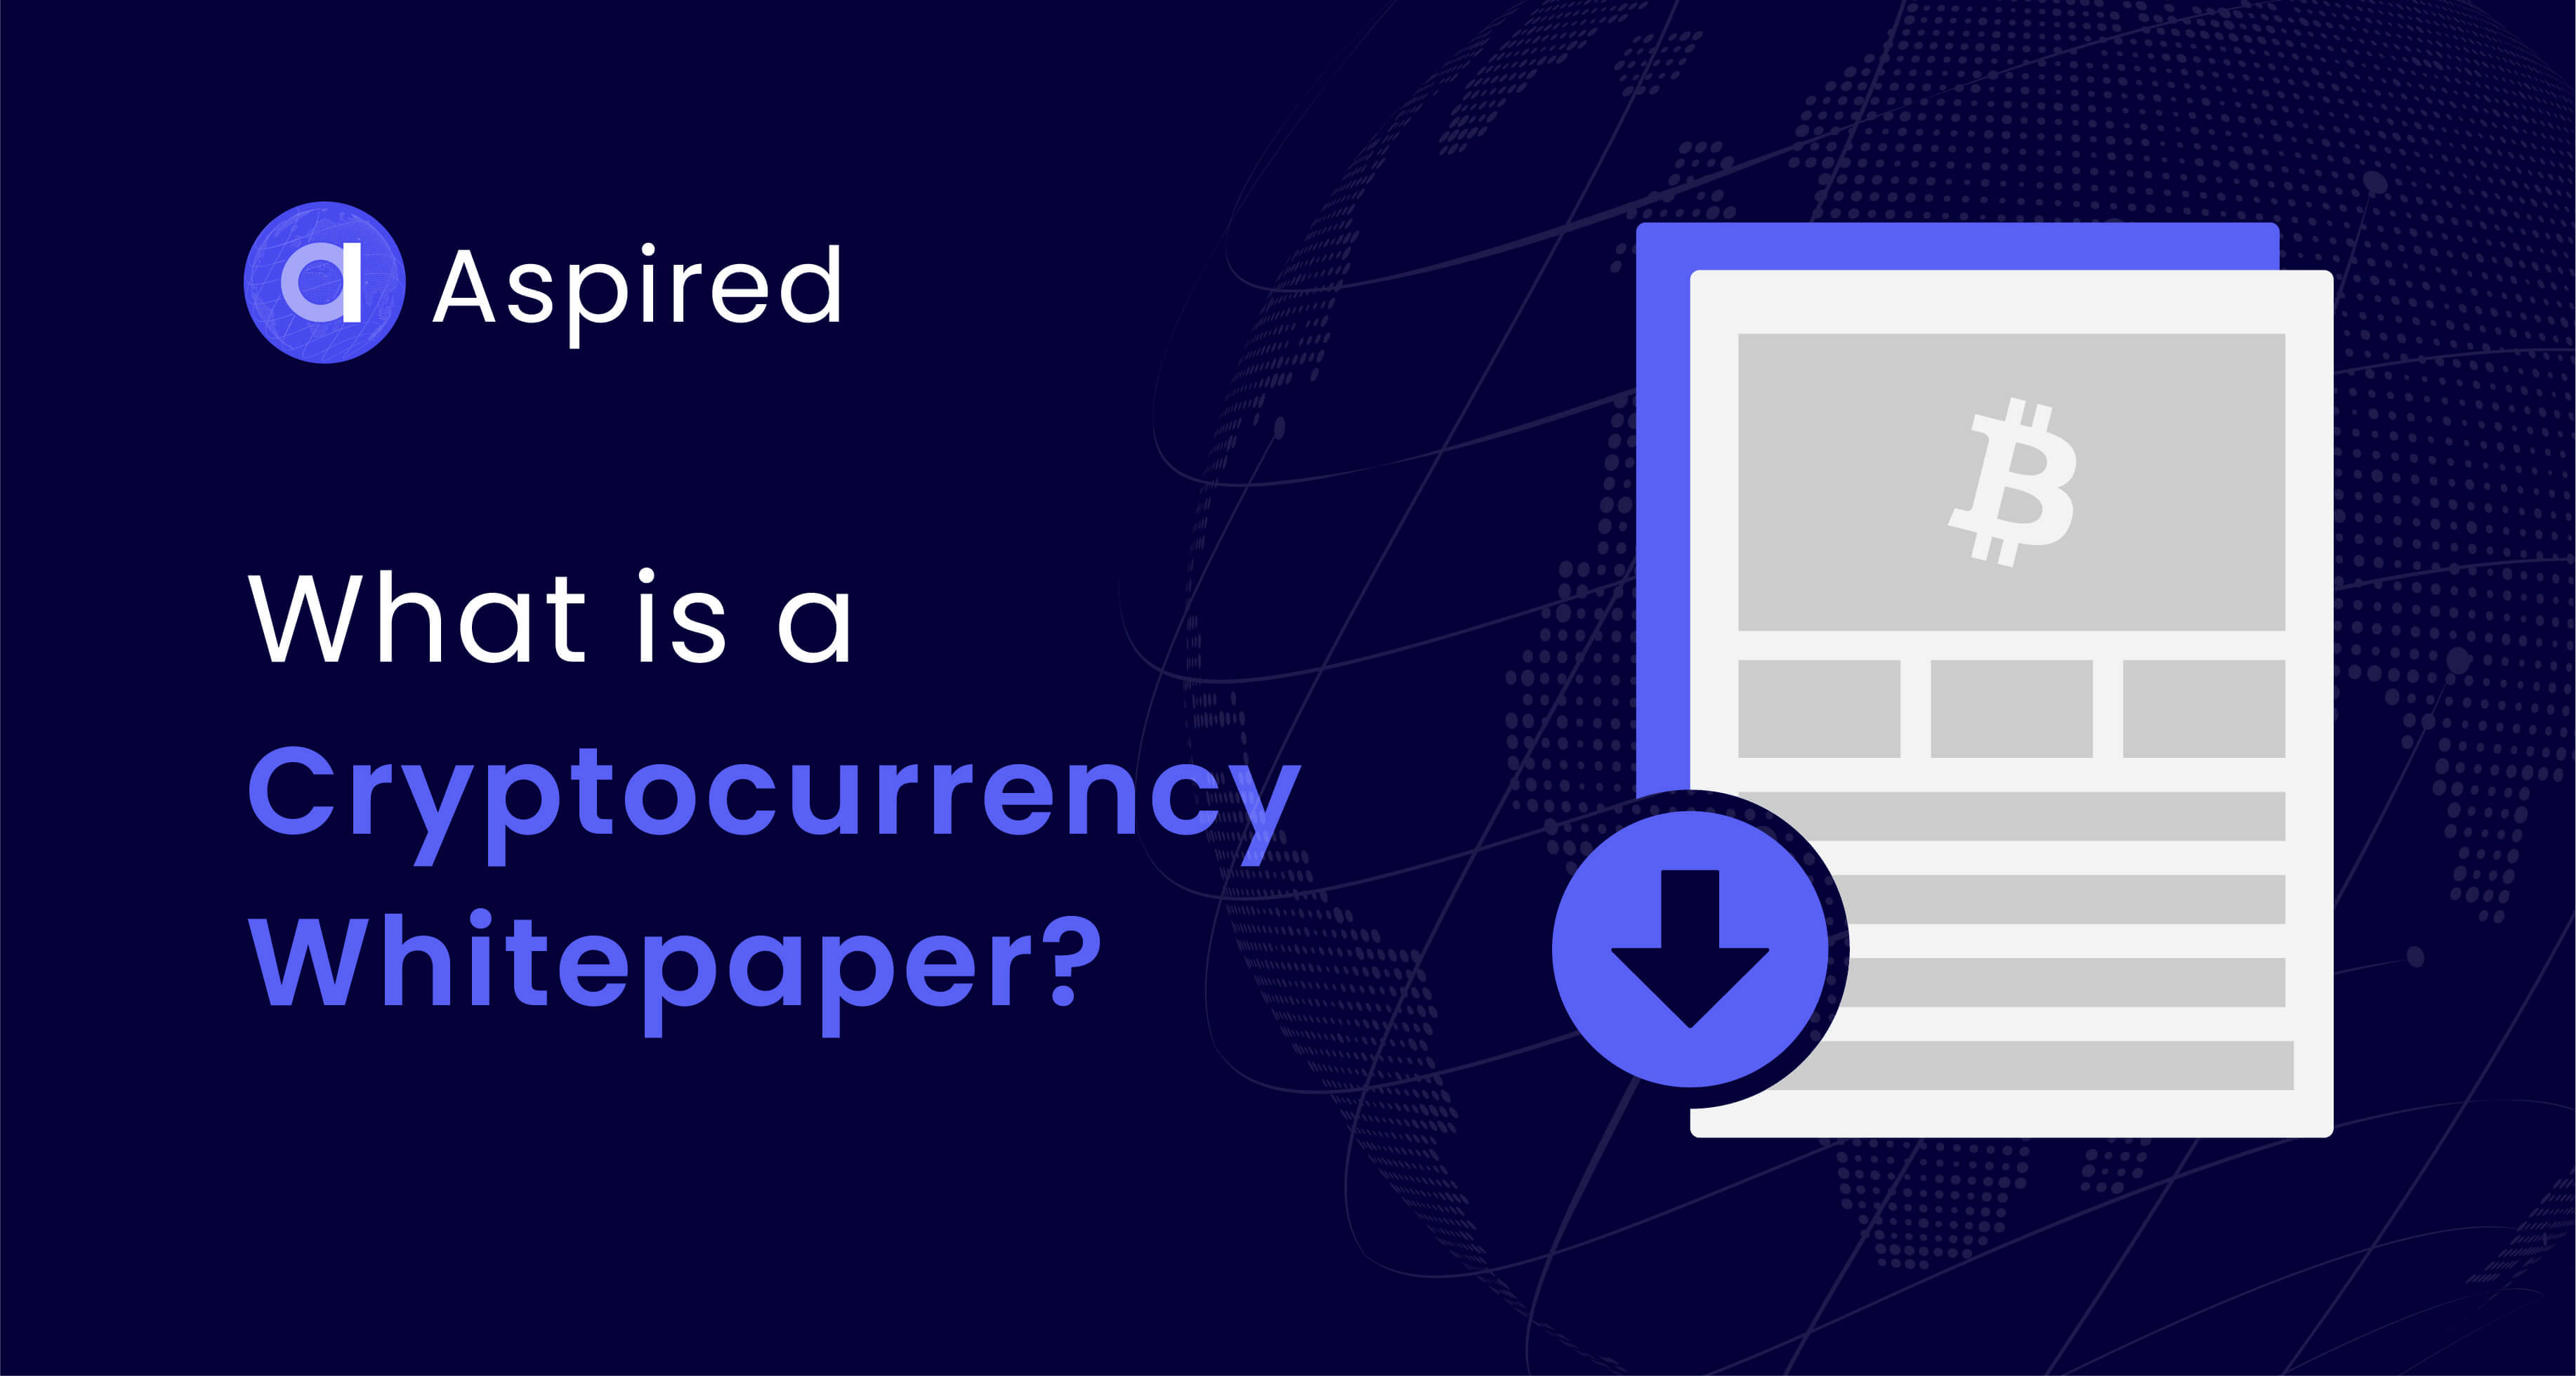 What is a Cryptocurrency Whitepaper?